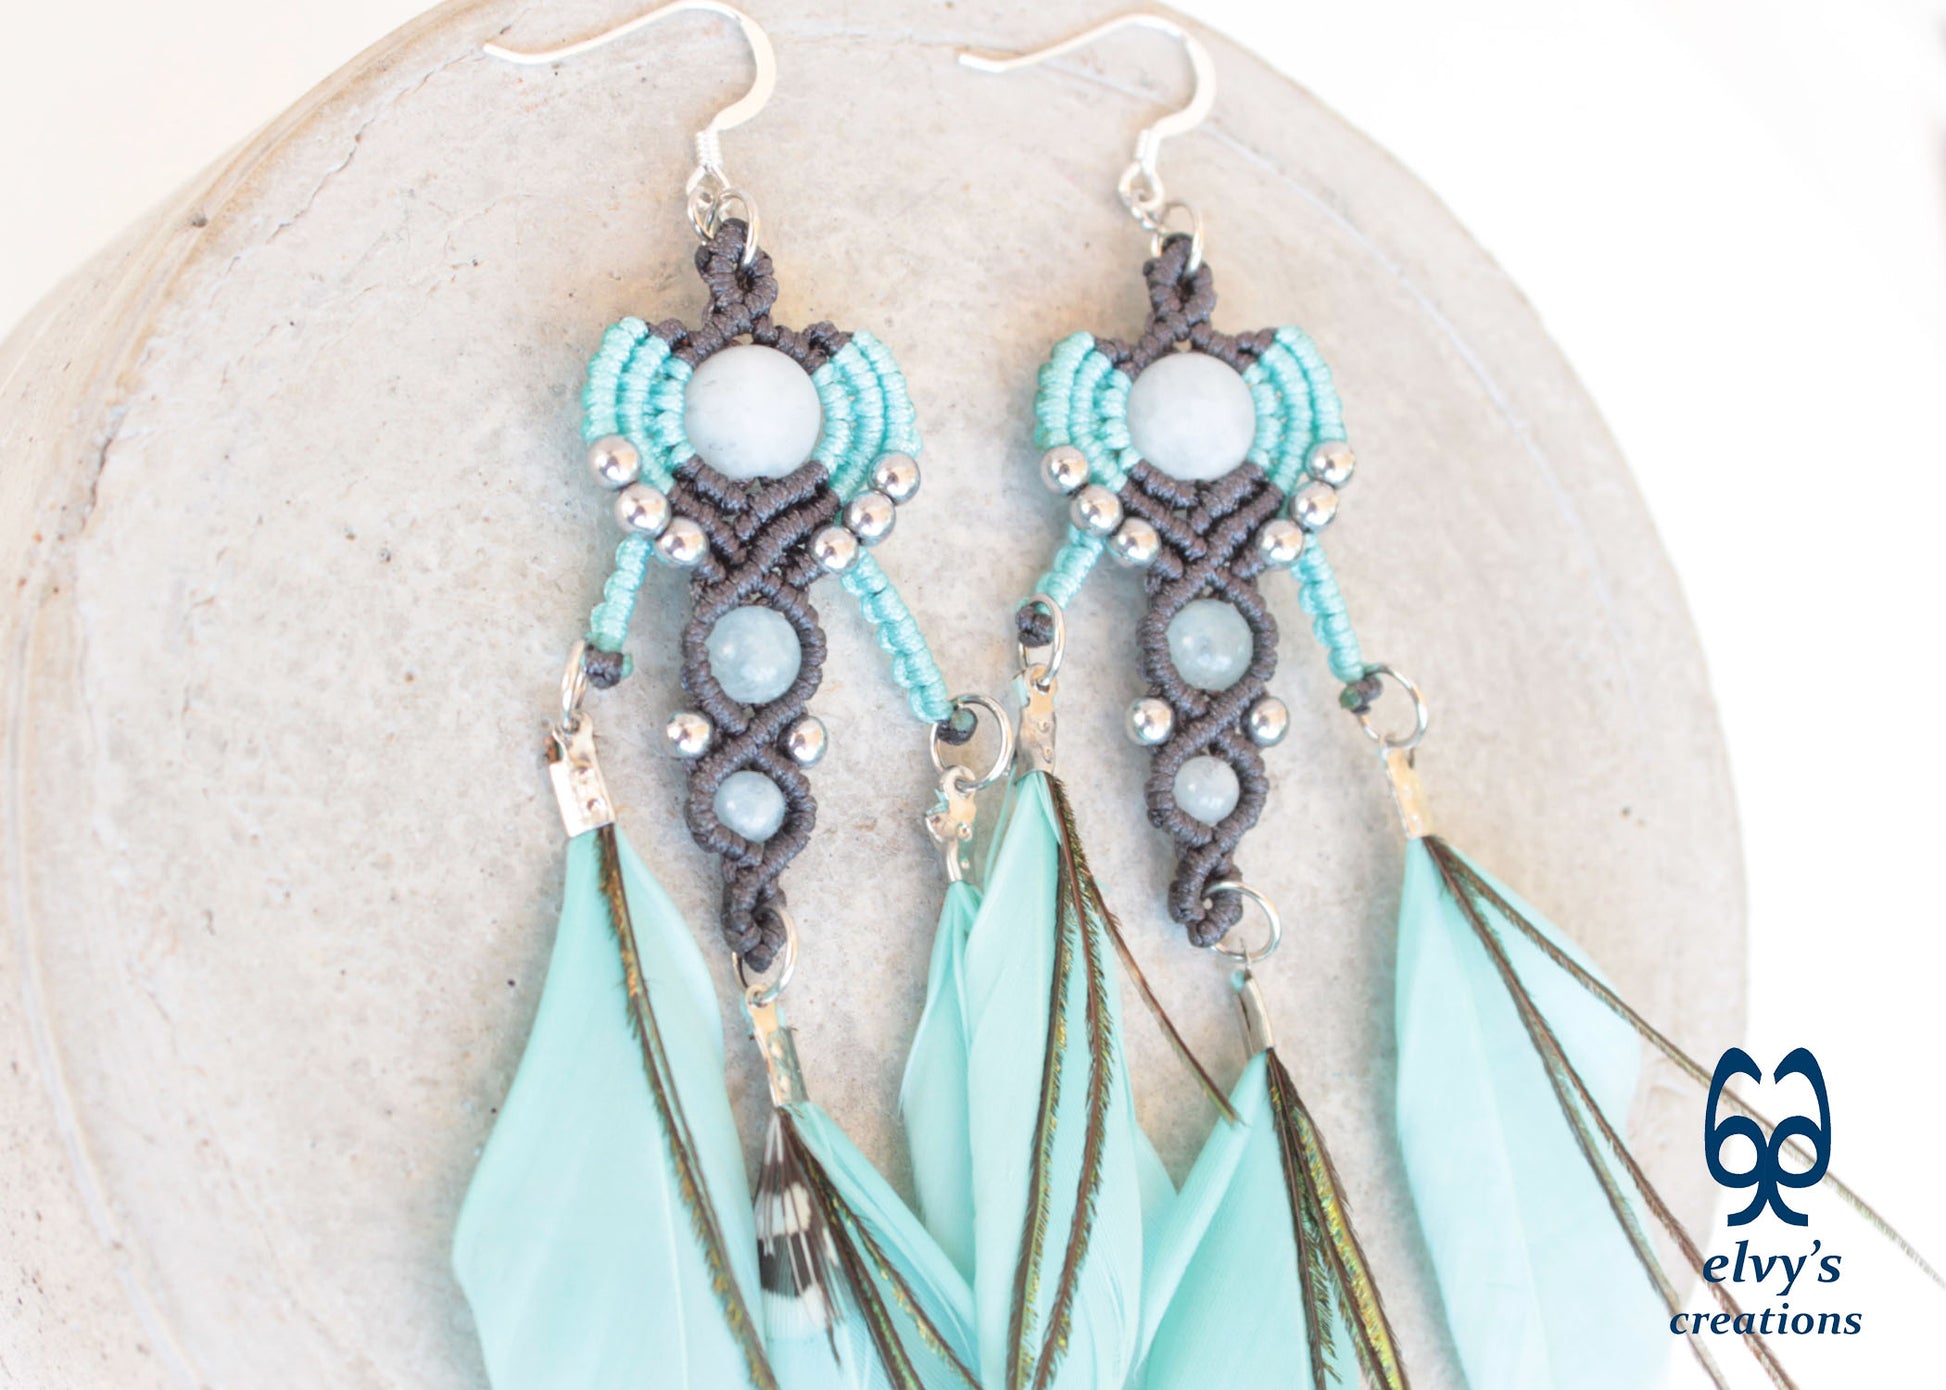 Gray Macrame Earrings with Aquamarine Gemstones, Handmade Silver Earrings with Turquoise Feathers